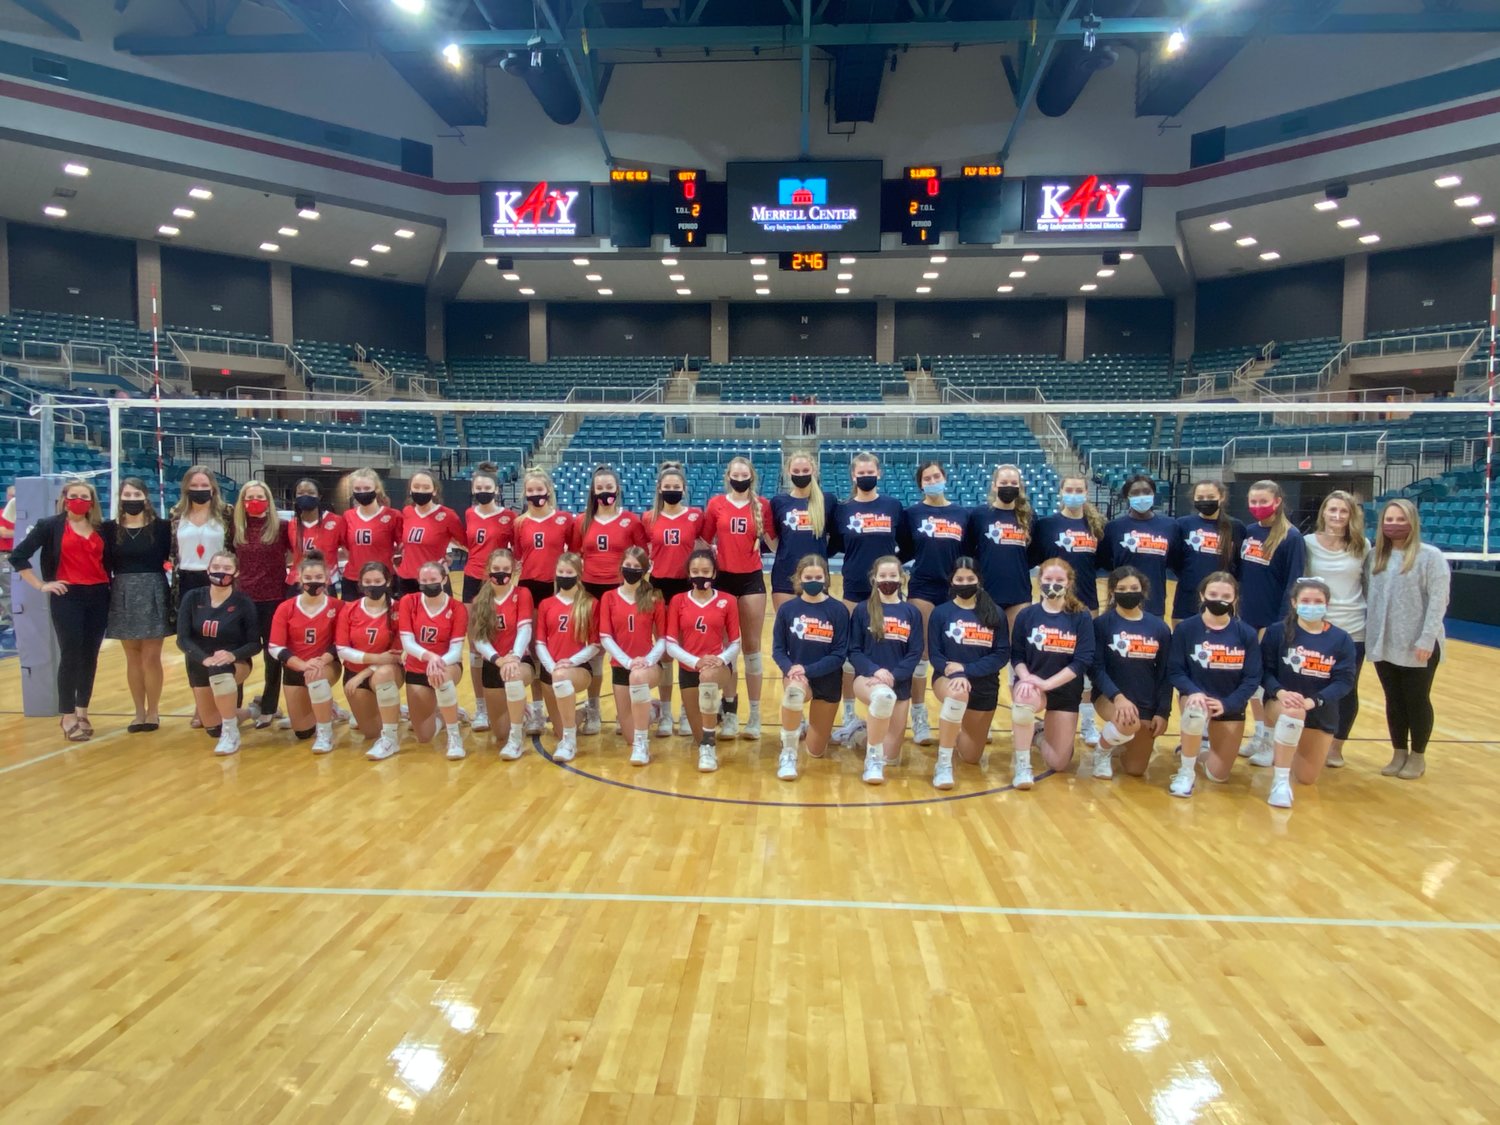 Katy High and Seven Lakes players and coaches posed for a photo before their Class 6A Region III volleyball final at the Merrell Center on Dec. 4. It was the first all-Katy ISD regional final in volleyball.